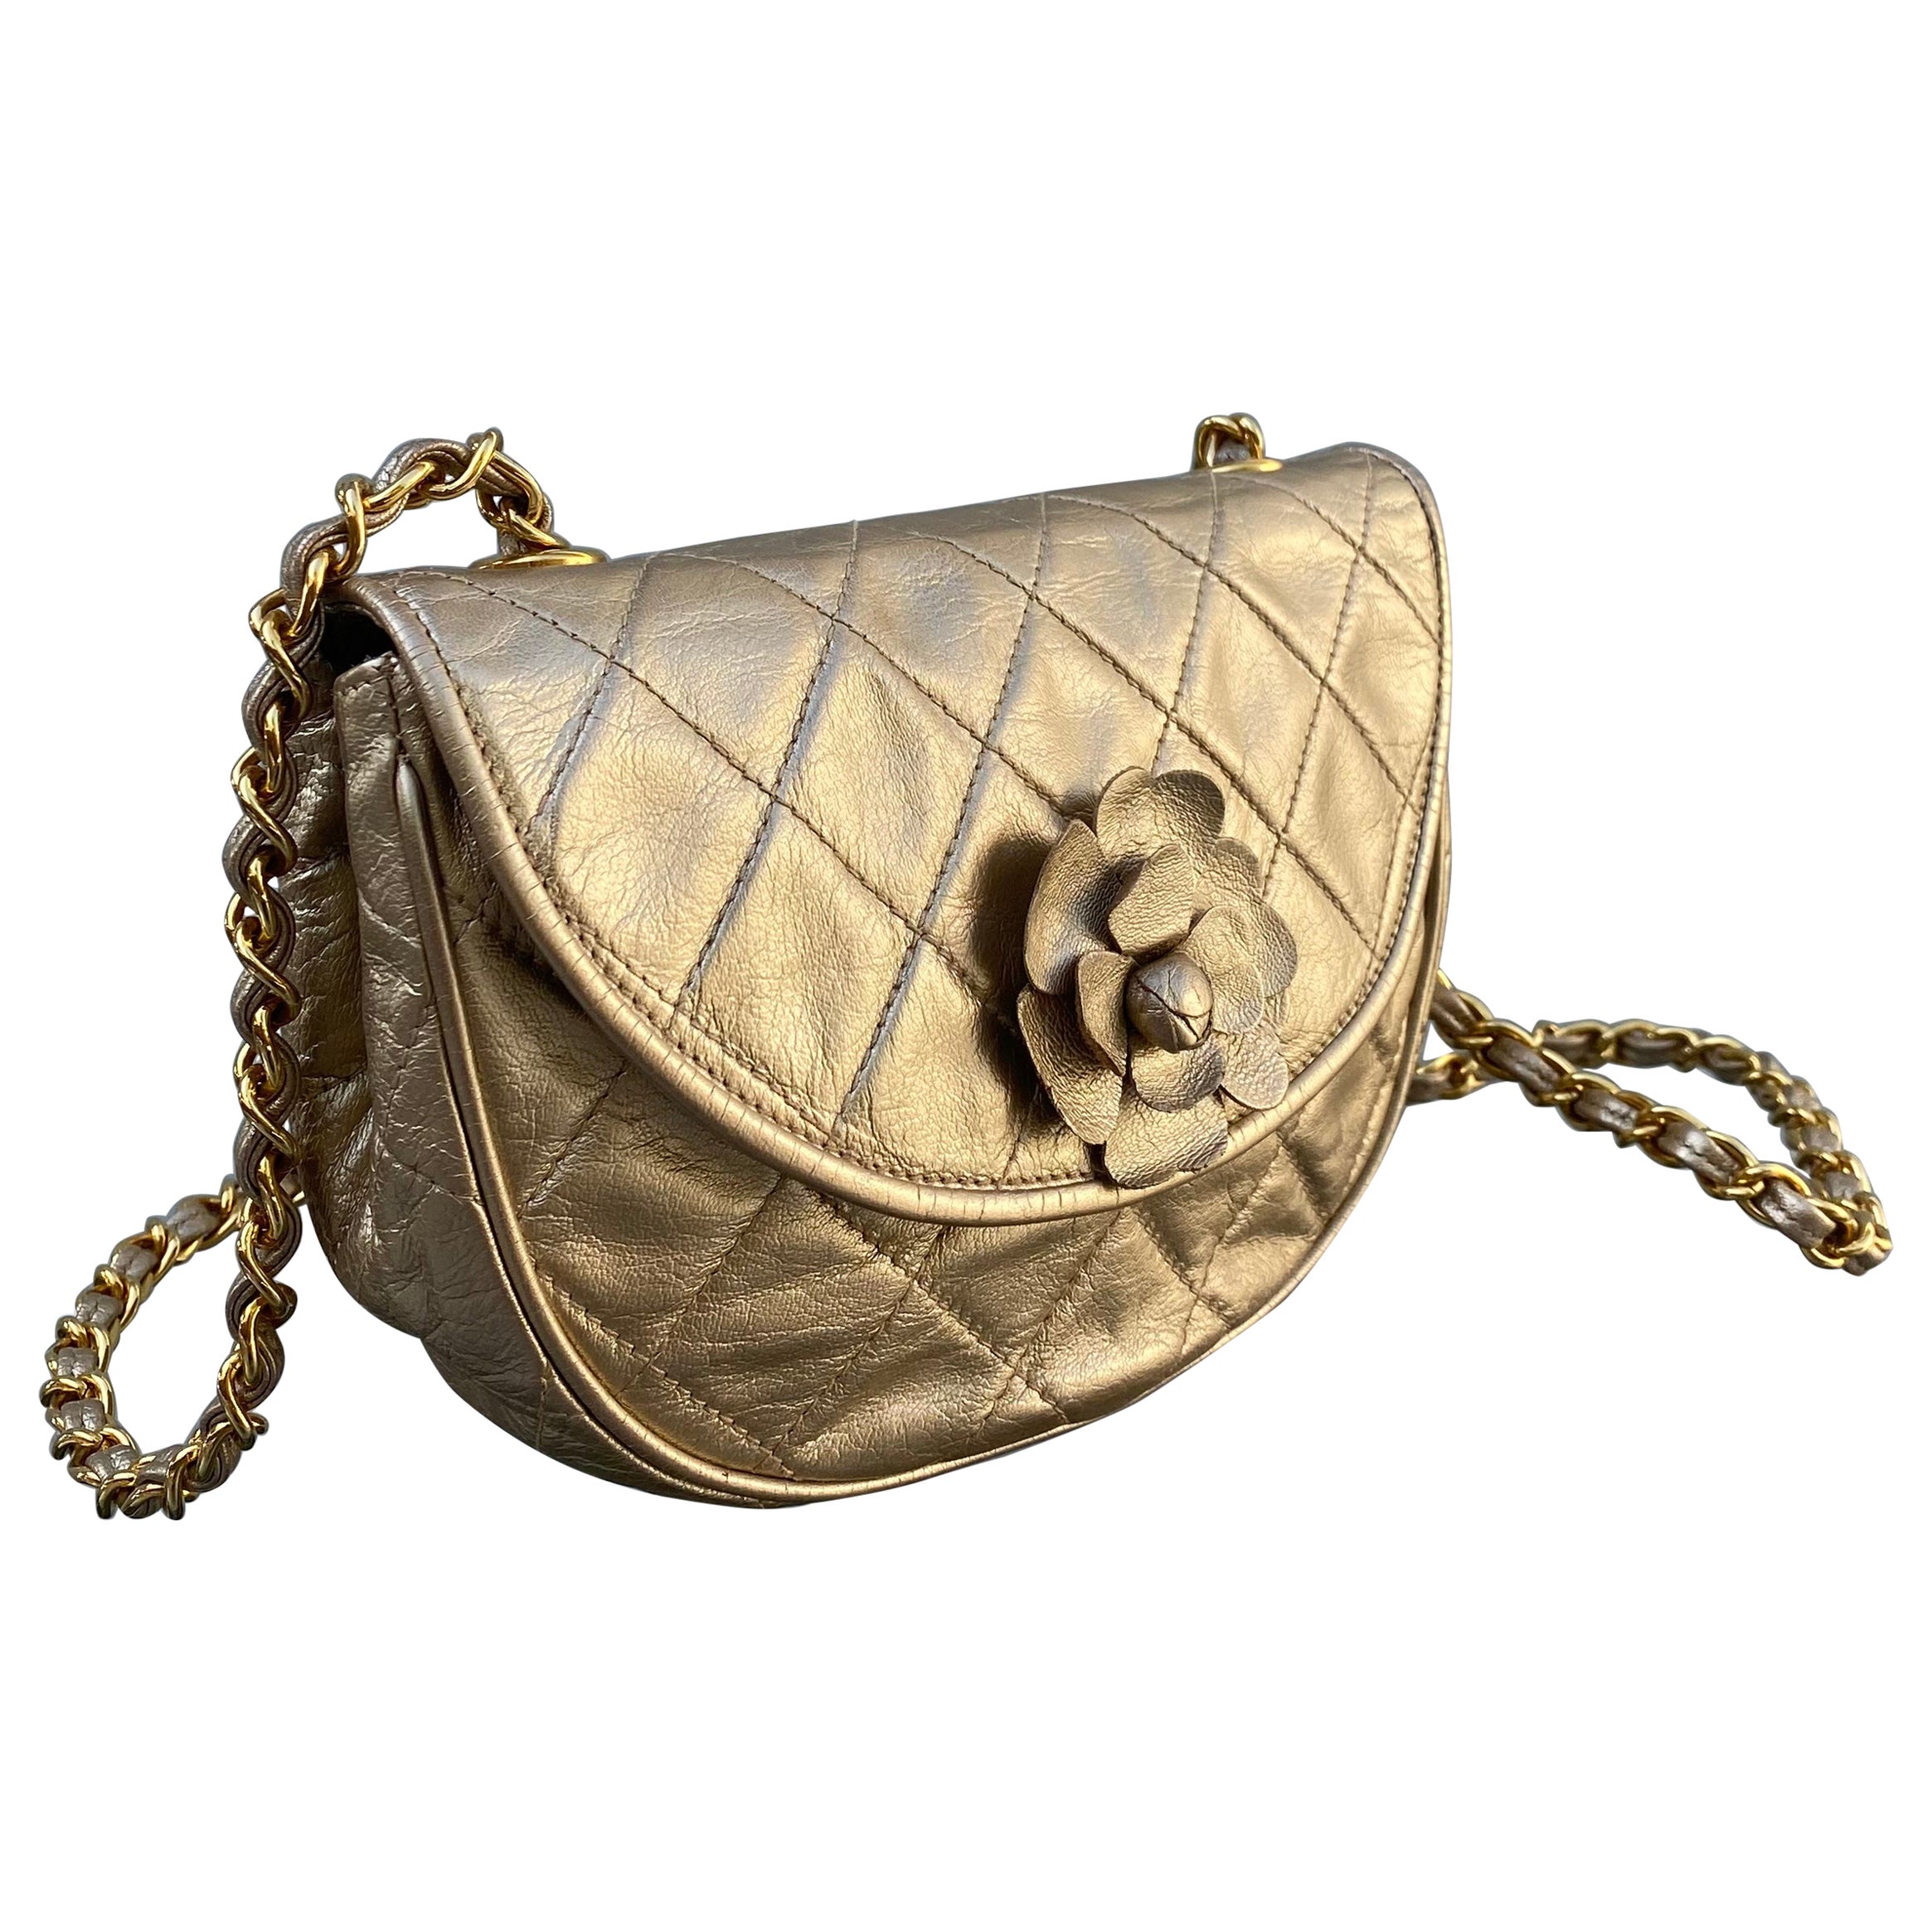 AUTHENTIC CHANEL VINTAGE CLASSIC DOUBLE FLAP WITH GOLD HARDWARE. RRP £6510